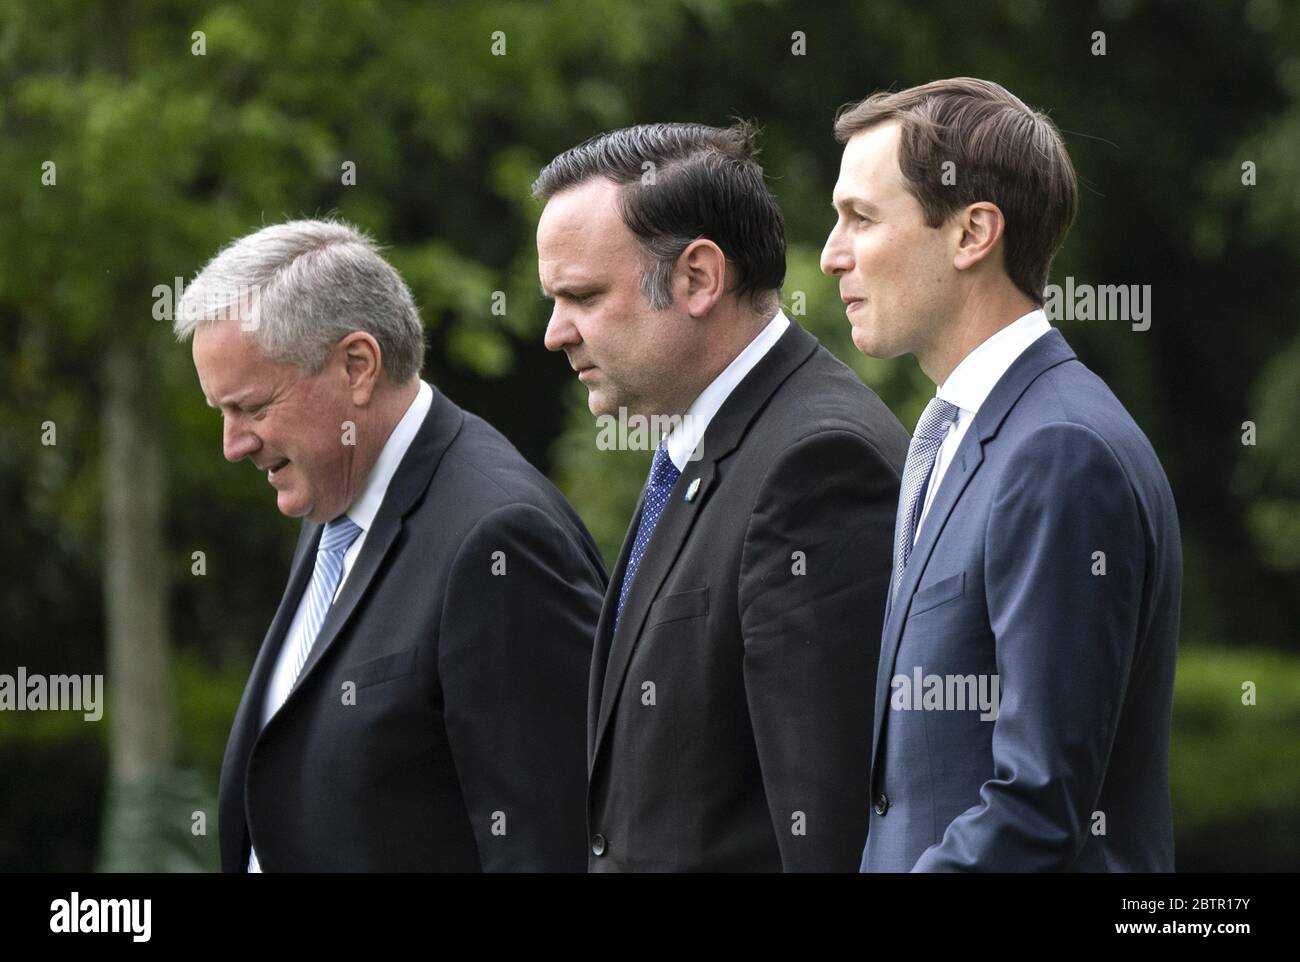 Washington, Untied States. 27th May, 2020. From left to right, Acting Chief of Staff Mark Meadows, Dan Scavino, White House Deputy Chief of Staff for Communications, and Jared Kushner, Presidential advisor and President Trump's son-in-law, depart the White House with President Donald Trump, in Washington, DC on Wednesday, May 27, 2020. President Trump and the First Lady are traveling to NASA's Kennedy Space Center to watch the SpaceX Mission 2 launch. Photo by Kevin Dietsch/UPI Credit: UPI/Alamy Live News Stock Photo